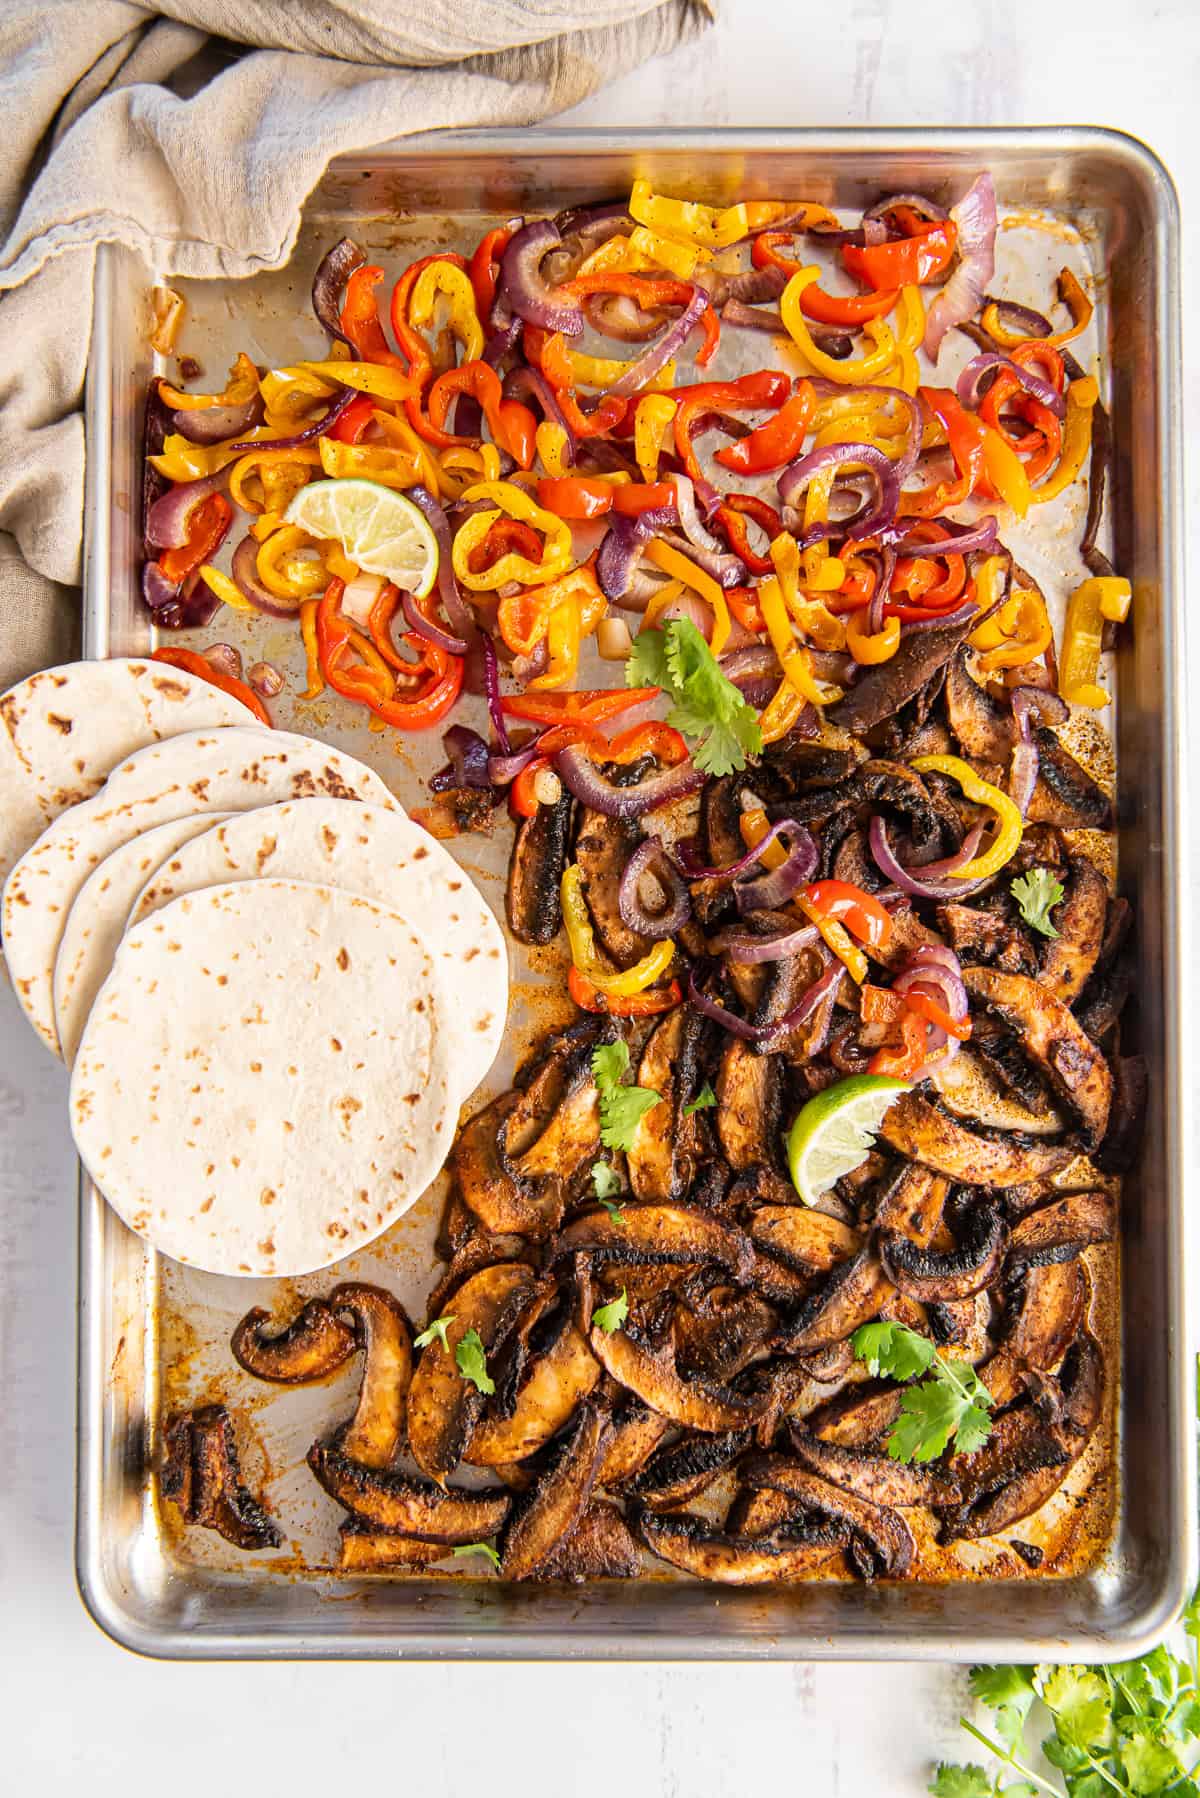 Roasted portobello mushrooms, peppers and onions and a baking sheet with small flour tortillas.